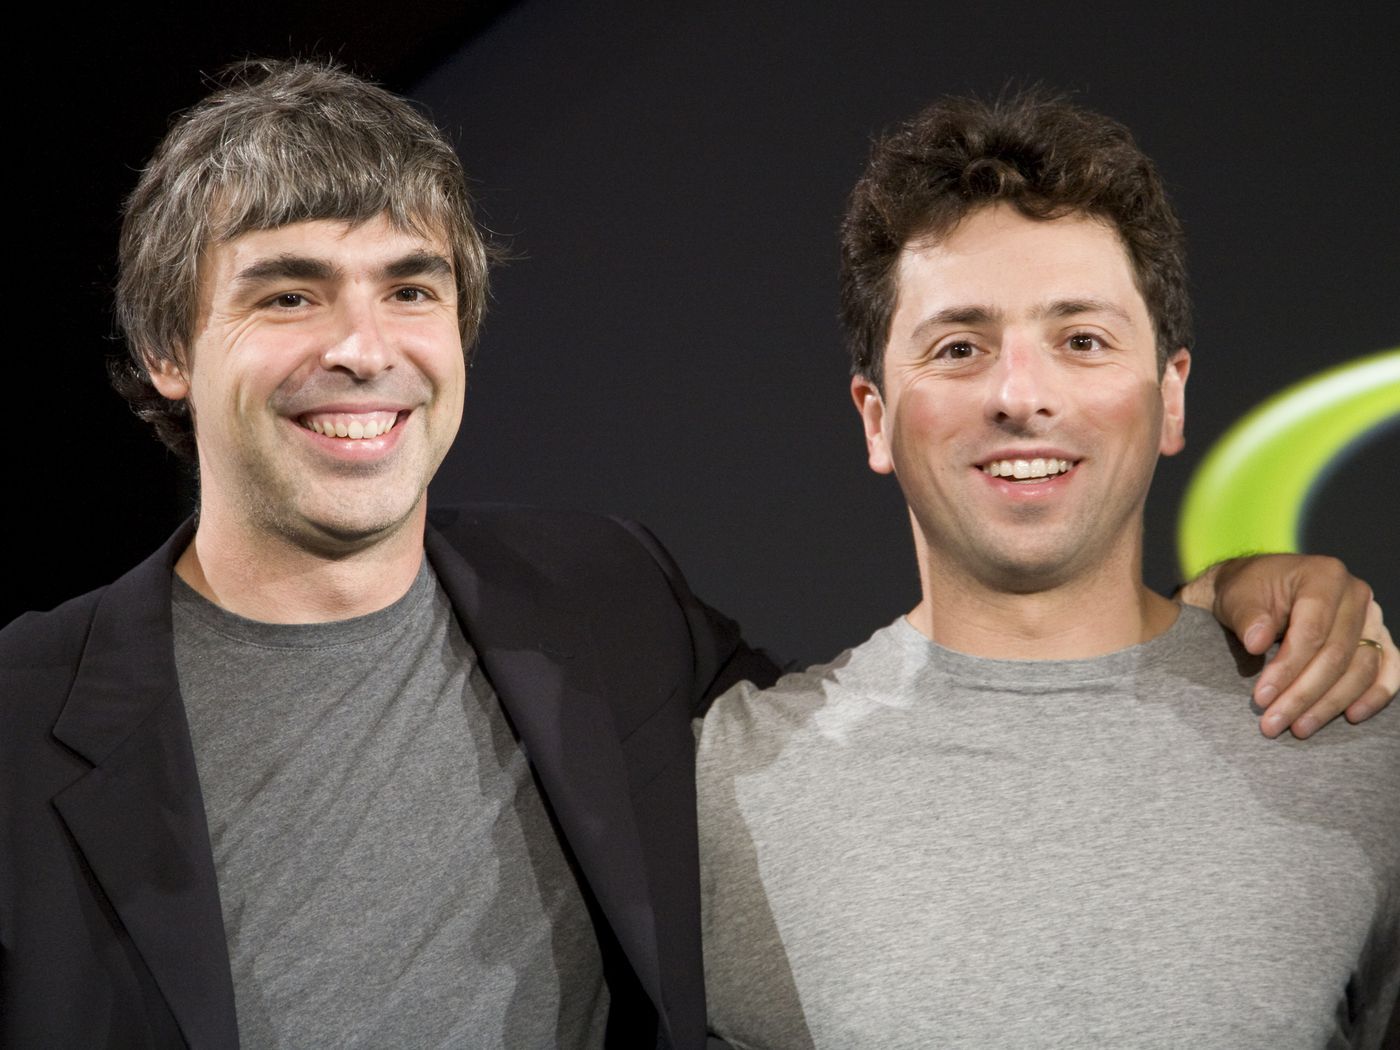 Google Co Founders Larry Page And Sergey Brin: A Timeline Of Their